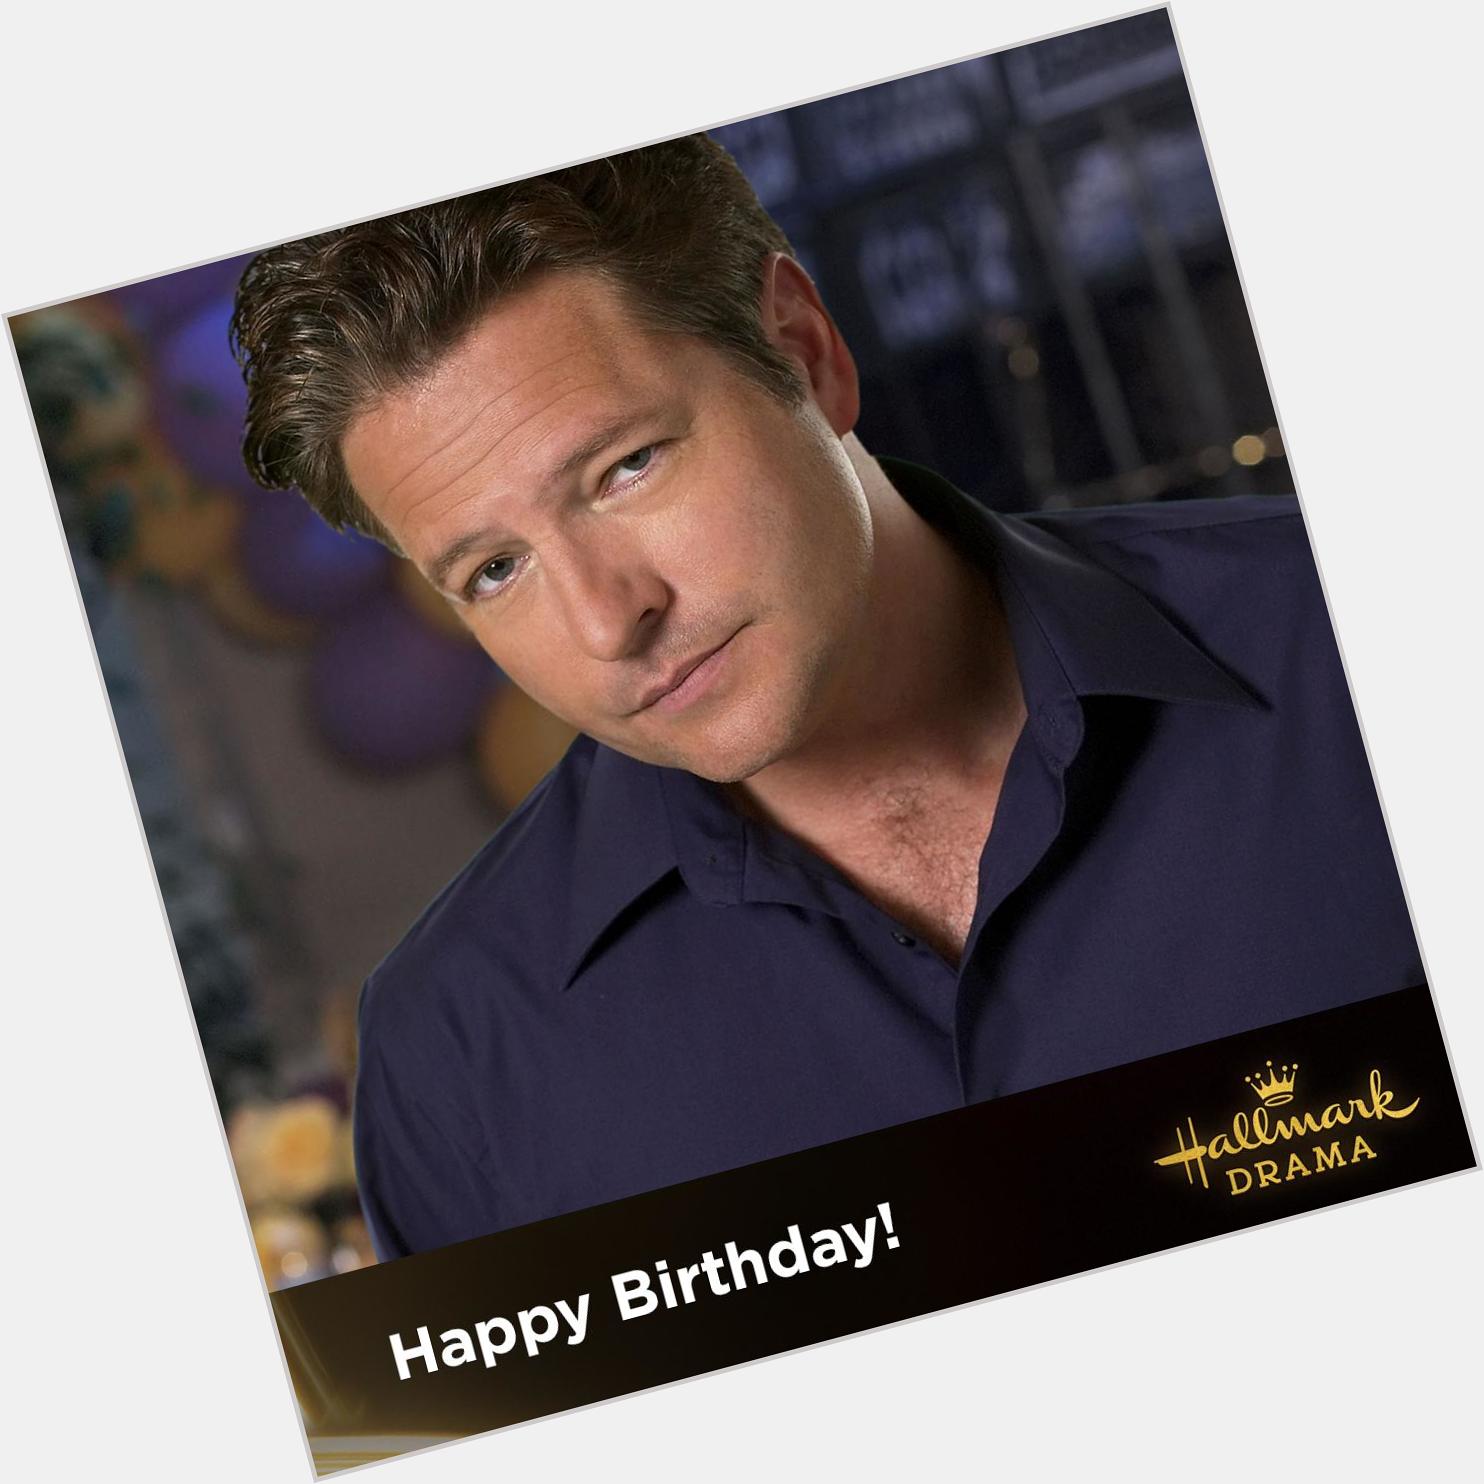 Let\s wish Dale Midkiff, star of the series and a very happy birthday! 